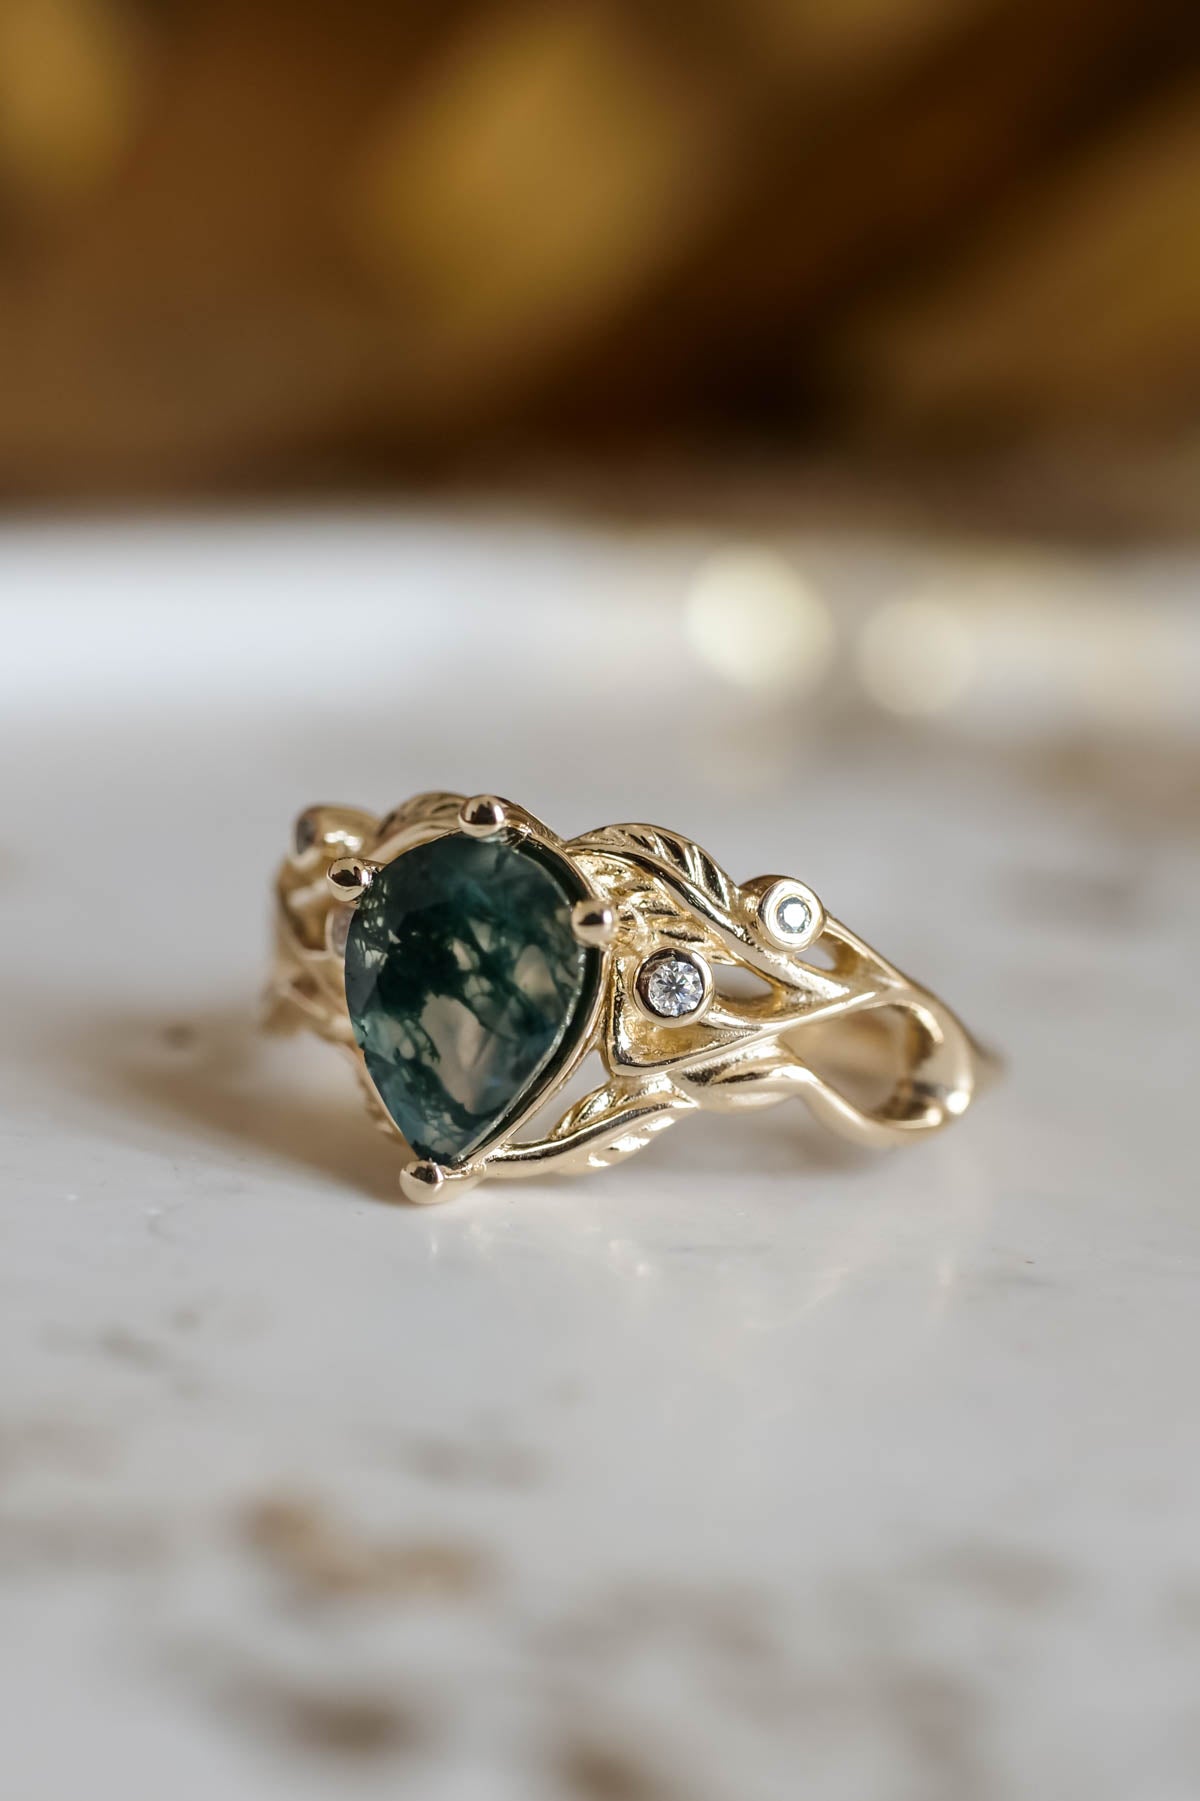 READY TO SHIP: Callisto in 14K yellow gold, pear moss agate 8x6 mm, moissanites, RING SIZE 5.75 US - Eden Garden Jewelry™